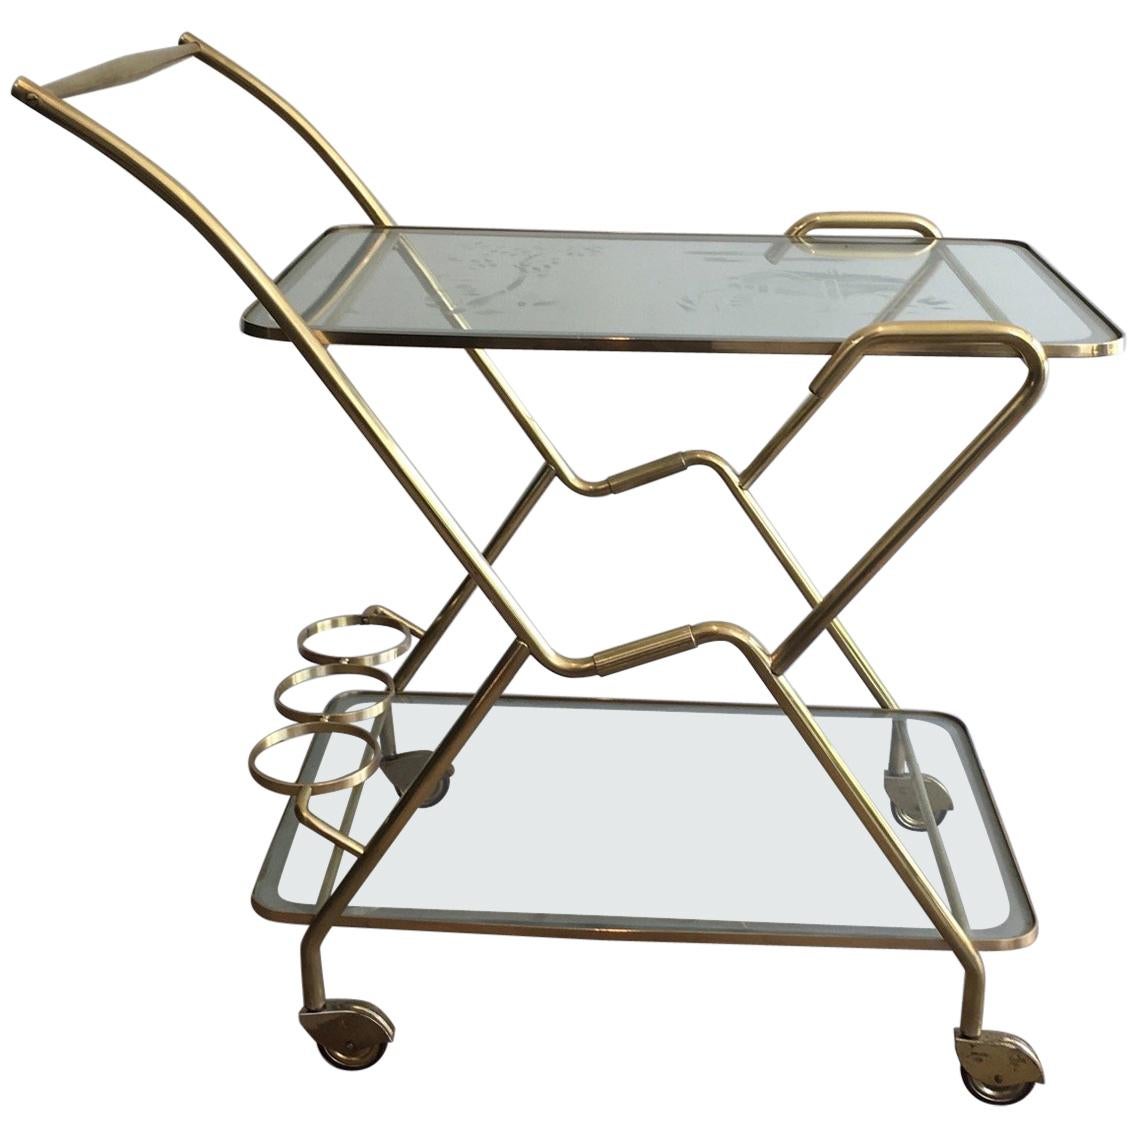 Interesting Italian Design Brass and Engraved Glass Drinks Trolley, circa 1950